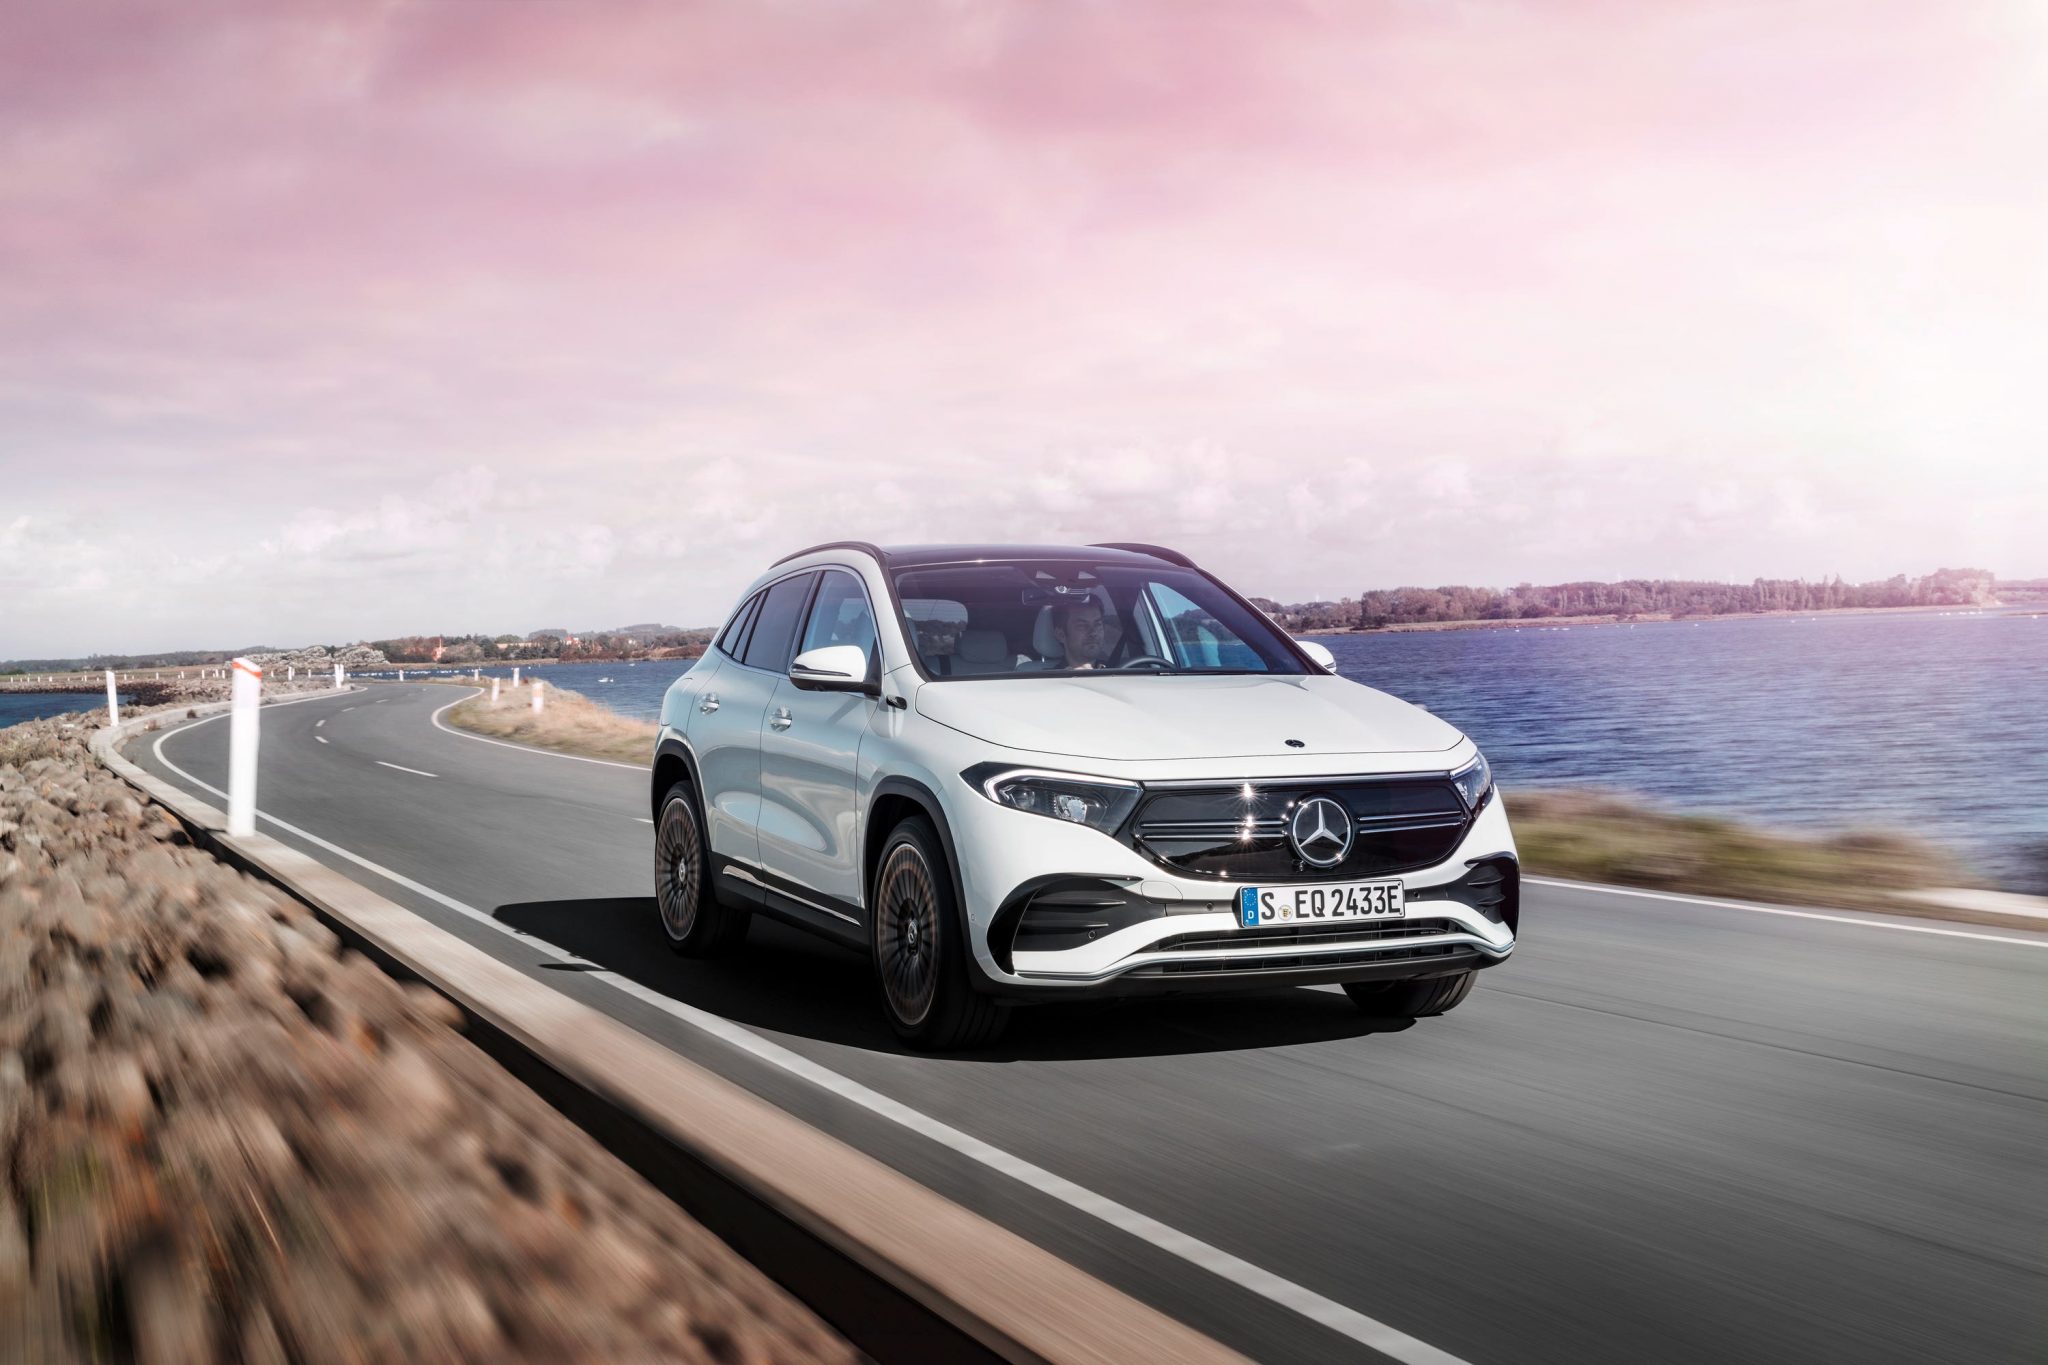 Mercedes electric range grows again with entrylevel EQA crossover